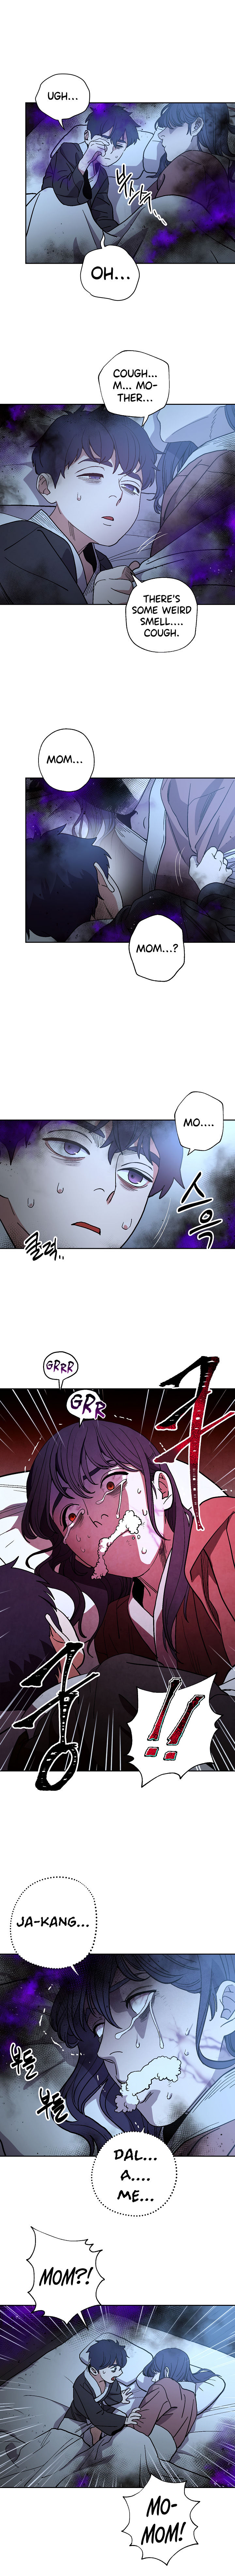 Poison Dragon - The Legend of an Asura - Chapter 1 Page 4